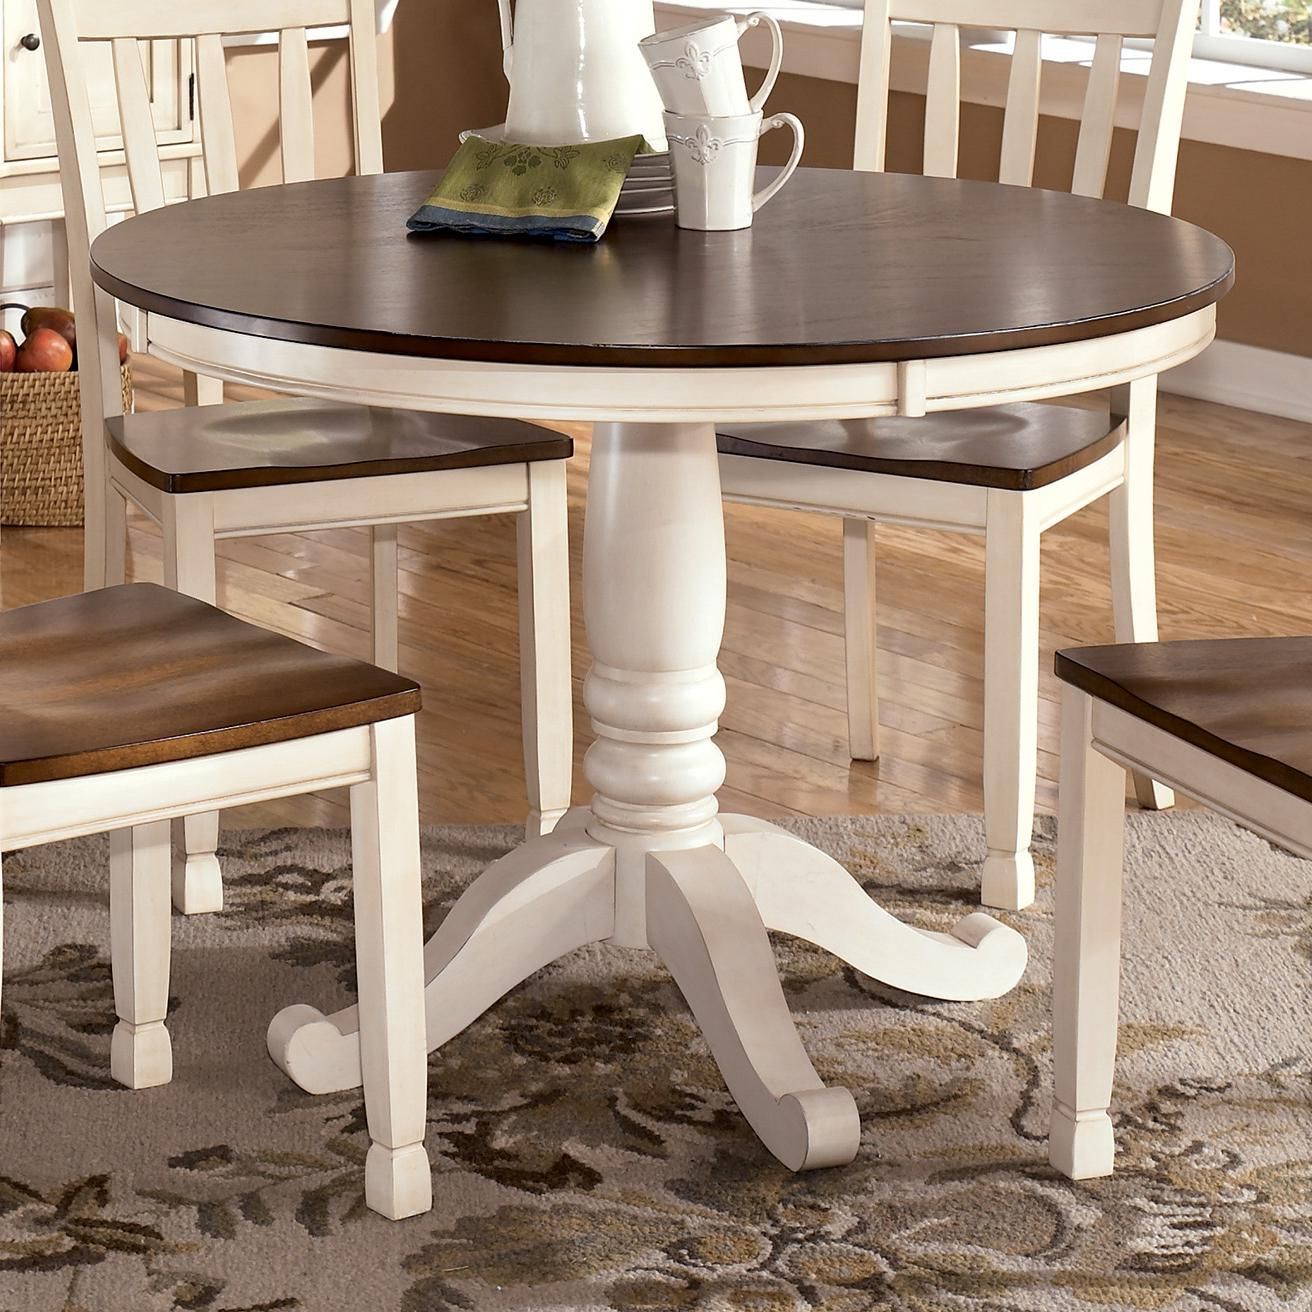 Favorite 47'' Pedestal Dining Tables Intended For Ashley Furniture Signature Design Whitesburg D583 15b+t (View 11 of 20)